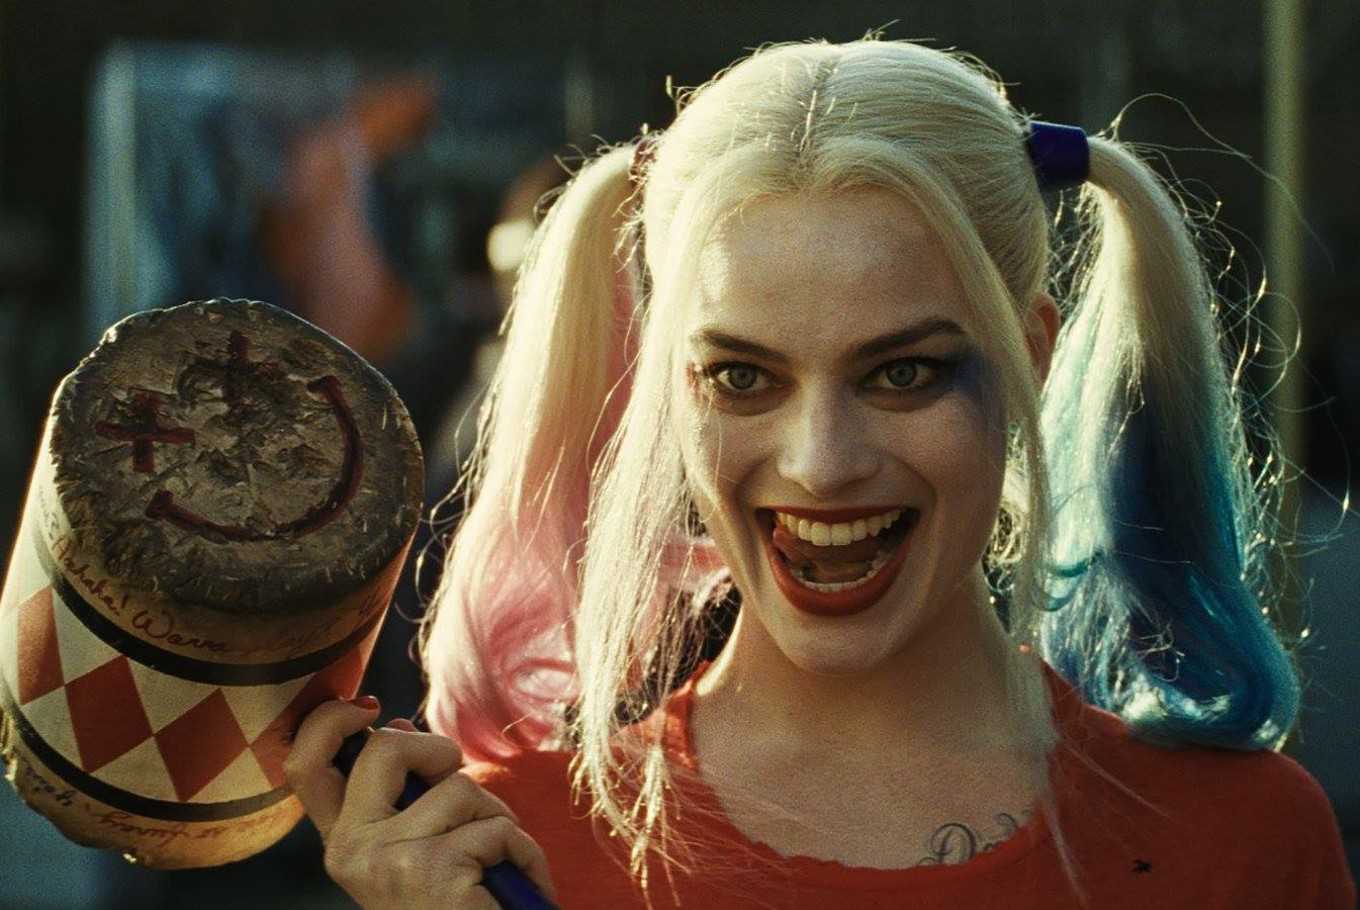 'Suicide Squad' tops North America box office with a tepid total